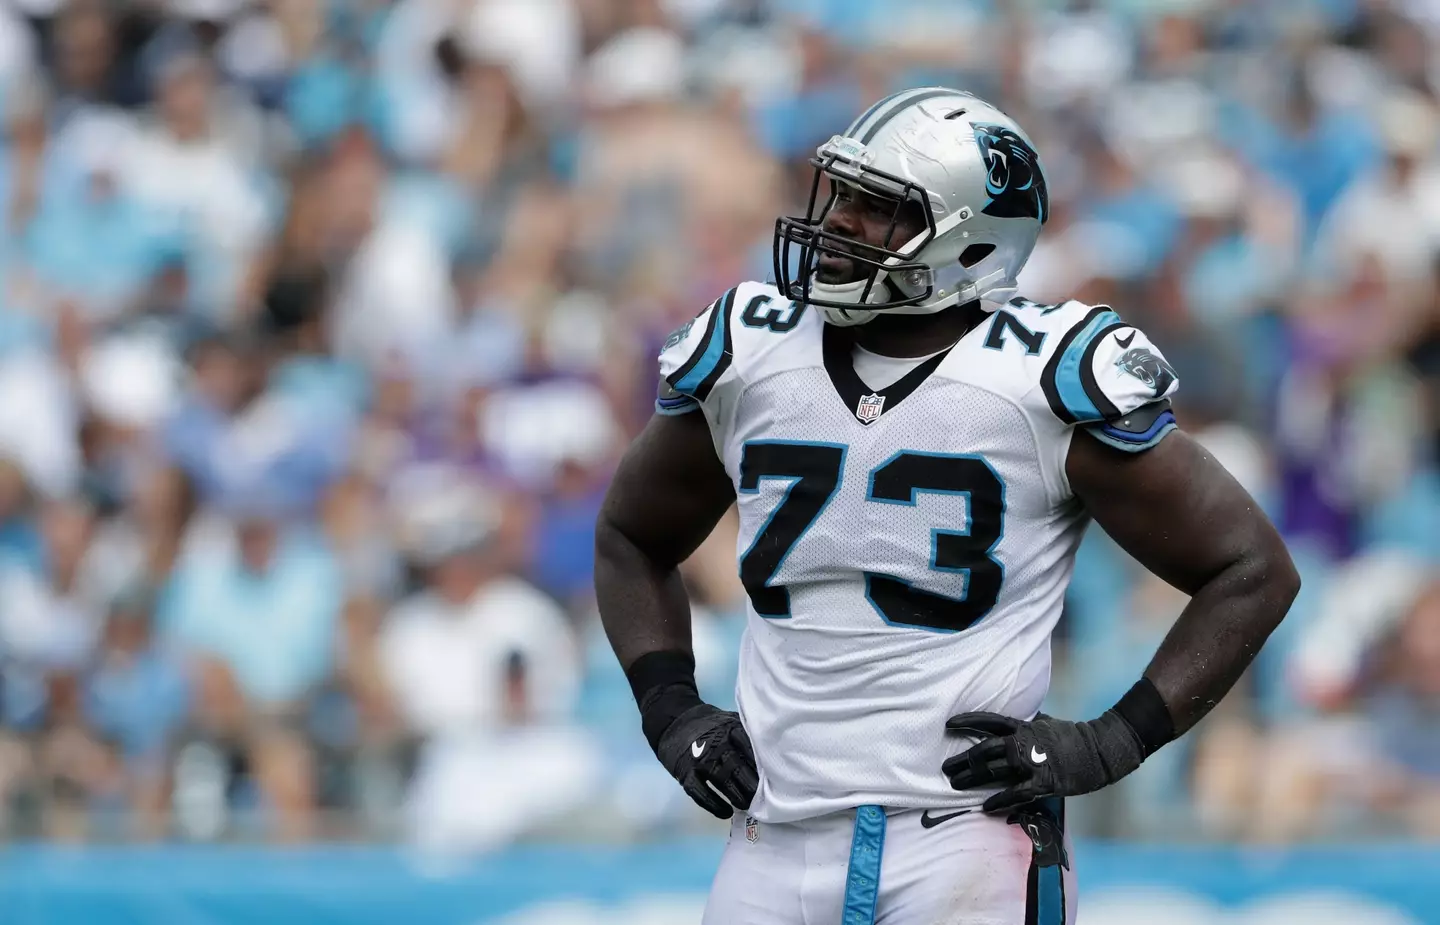 Michael Oher in the NFL. Streeter Lecka/Getty Images